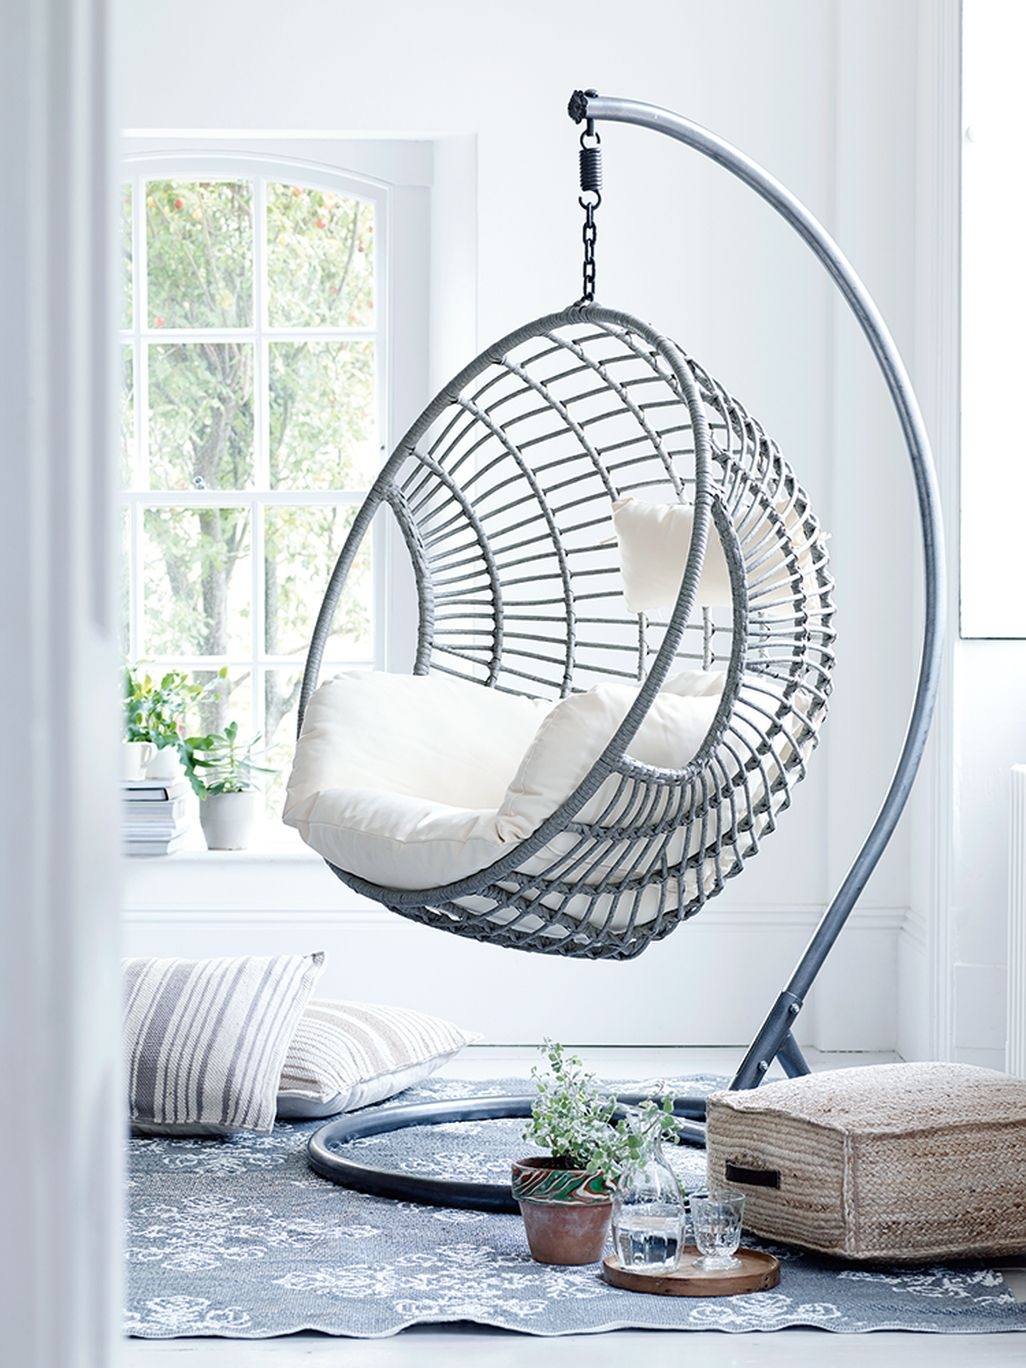 Hanging Chair For Bedroom - VisualHunt